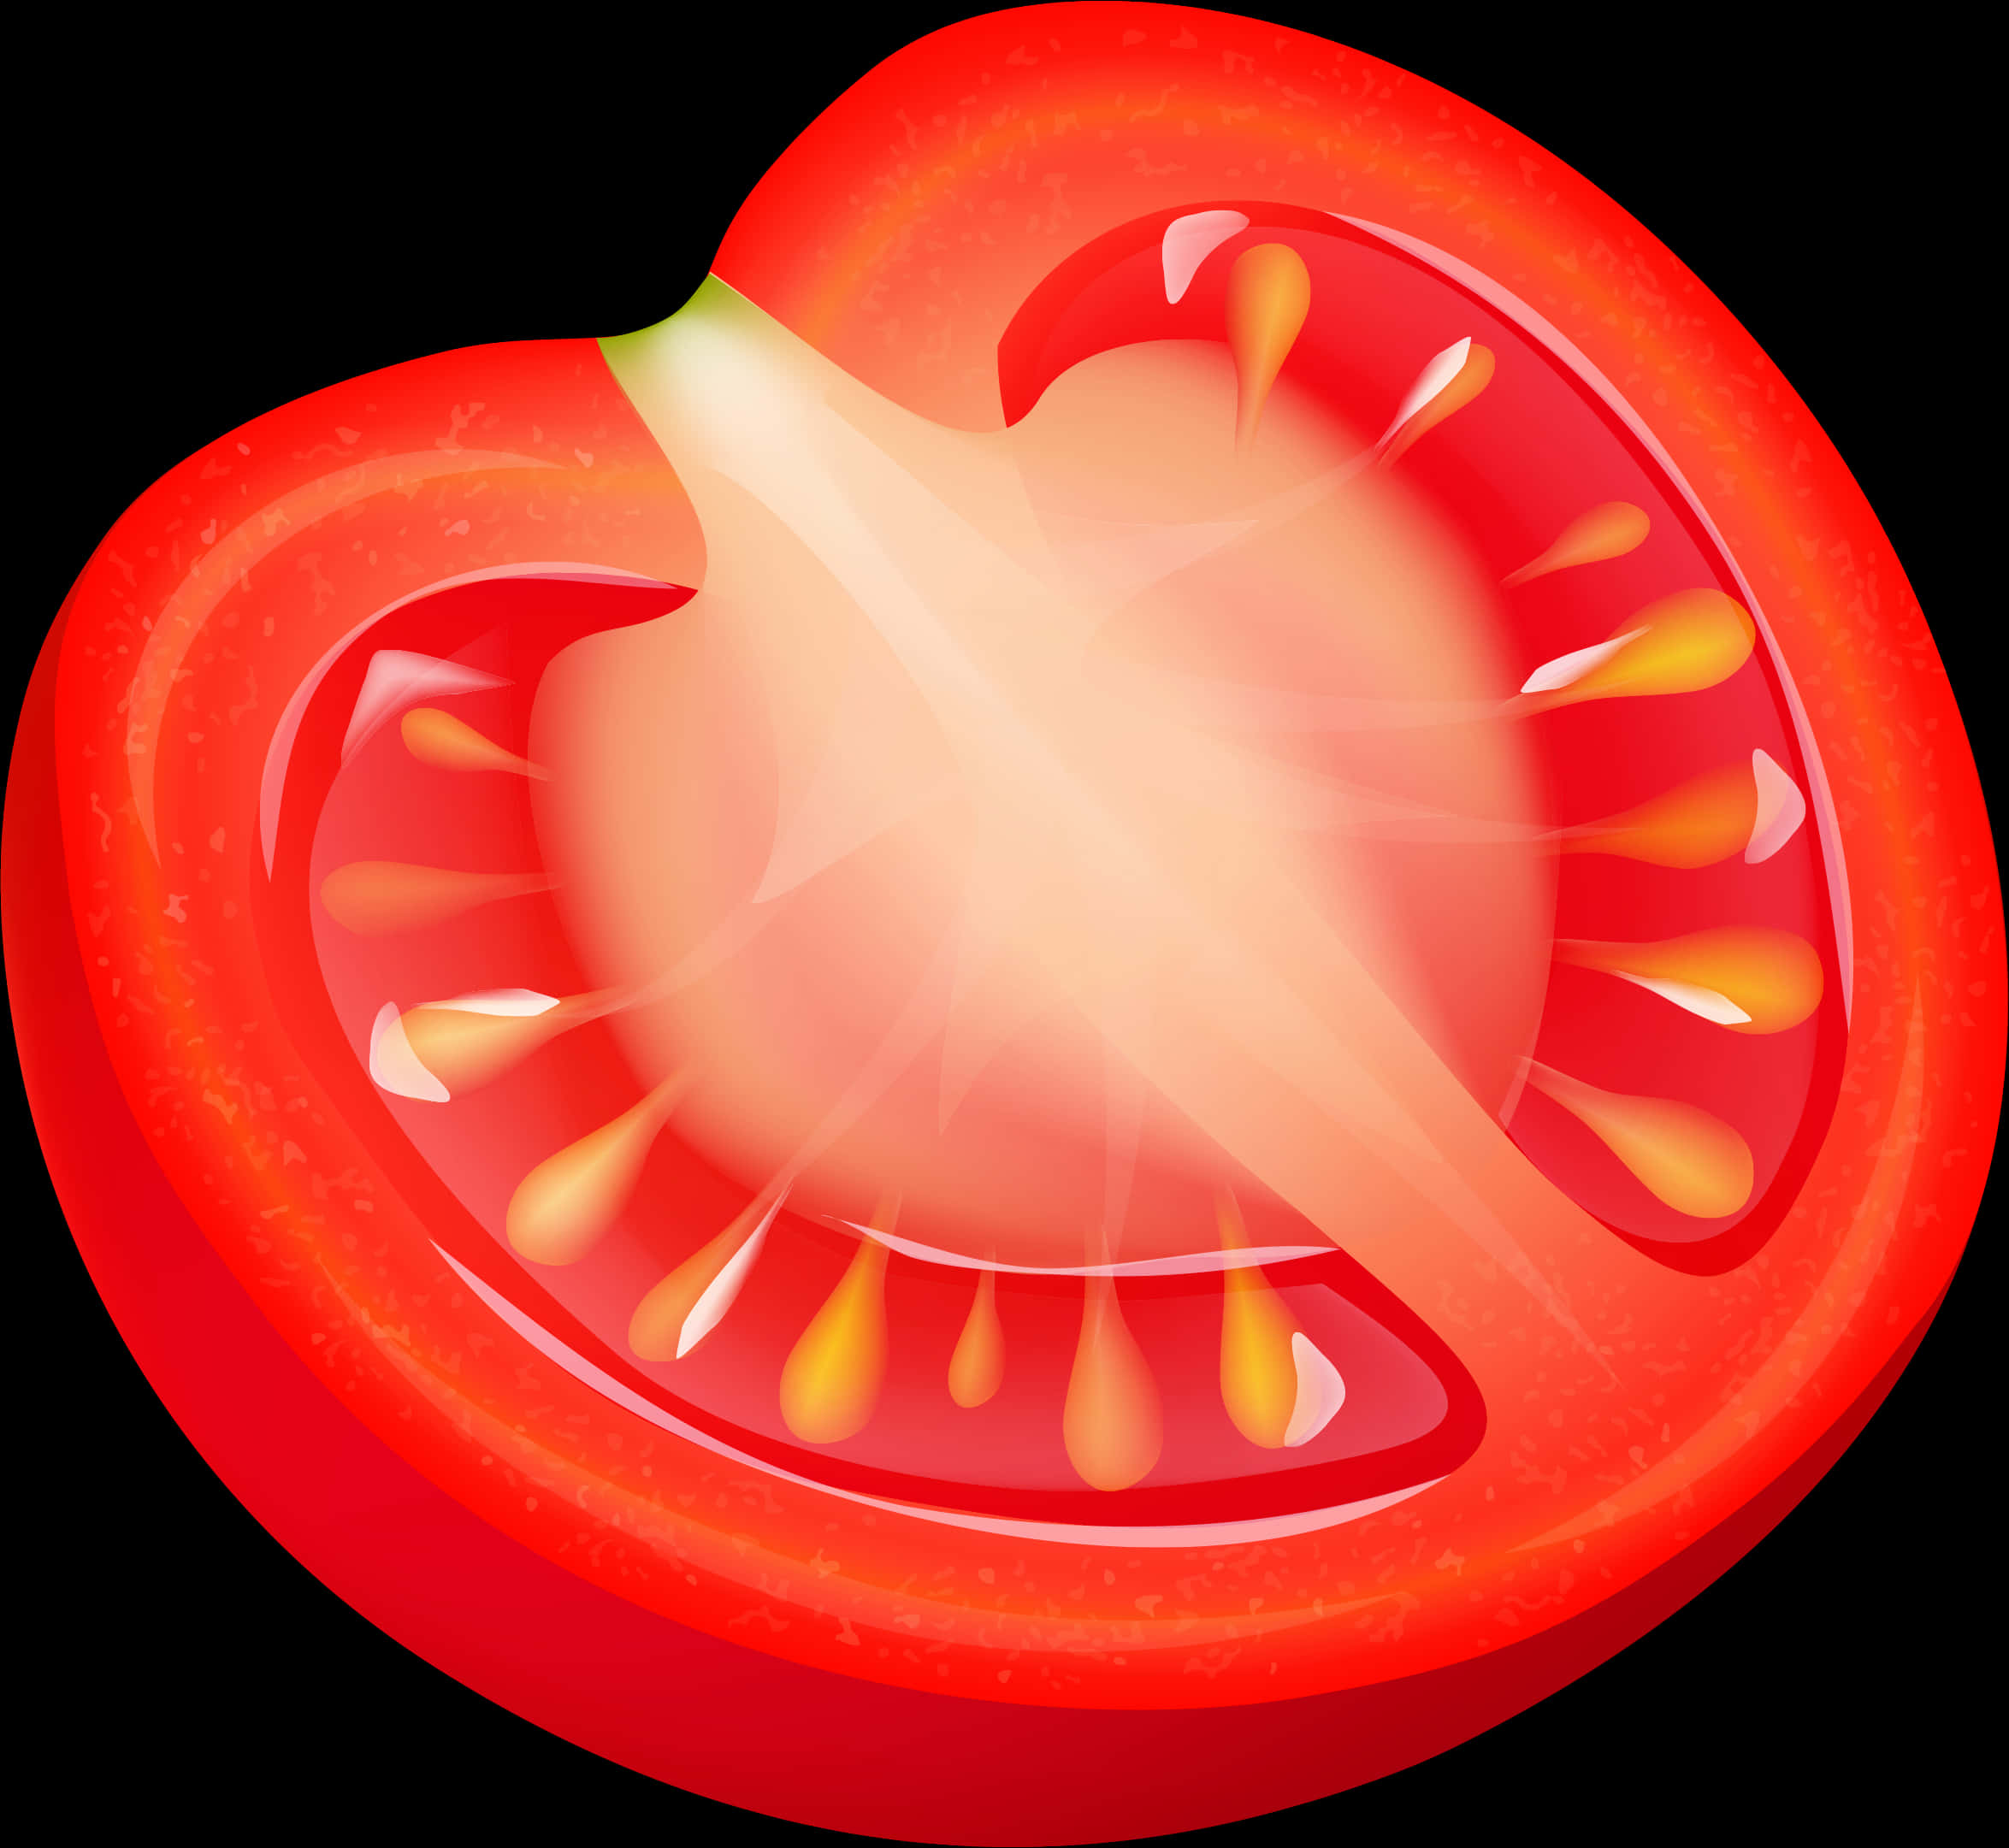 Sliced Tomato Cross Section PNG